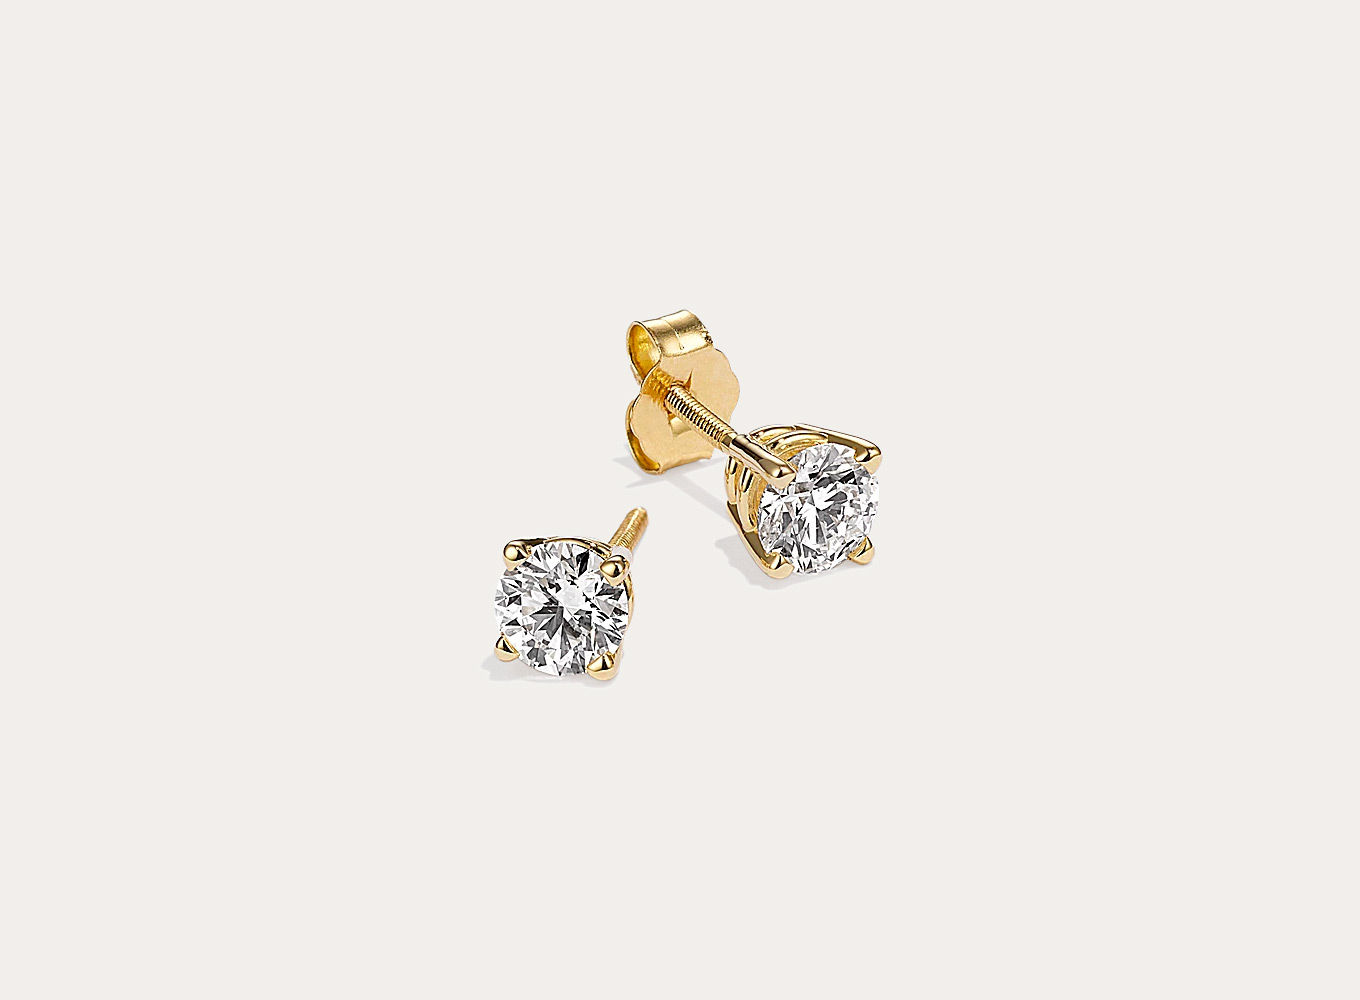 7/8 ct. Lab-Grown Diamond Stud Earrings in 14k Yellow Gold. These earrings are set in quality 14-karat yellow gold baskets, which has added nickel, zinc, silver, and copper alloys that make a bright shade. The lab-grown diamonds have been hand-matched for exceptional sparkle and fire. The push-on/screw-off backs securely hold the earrings in place.